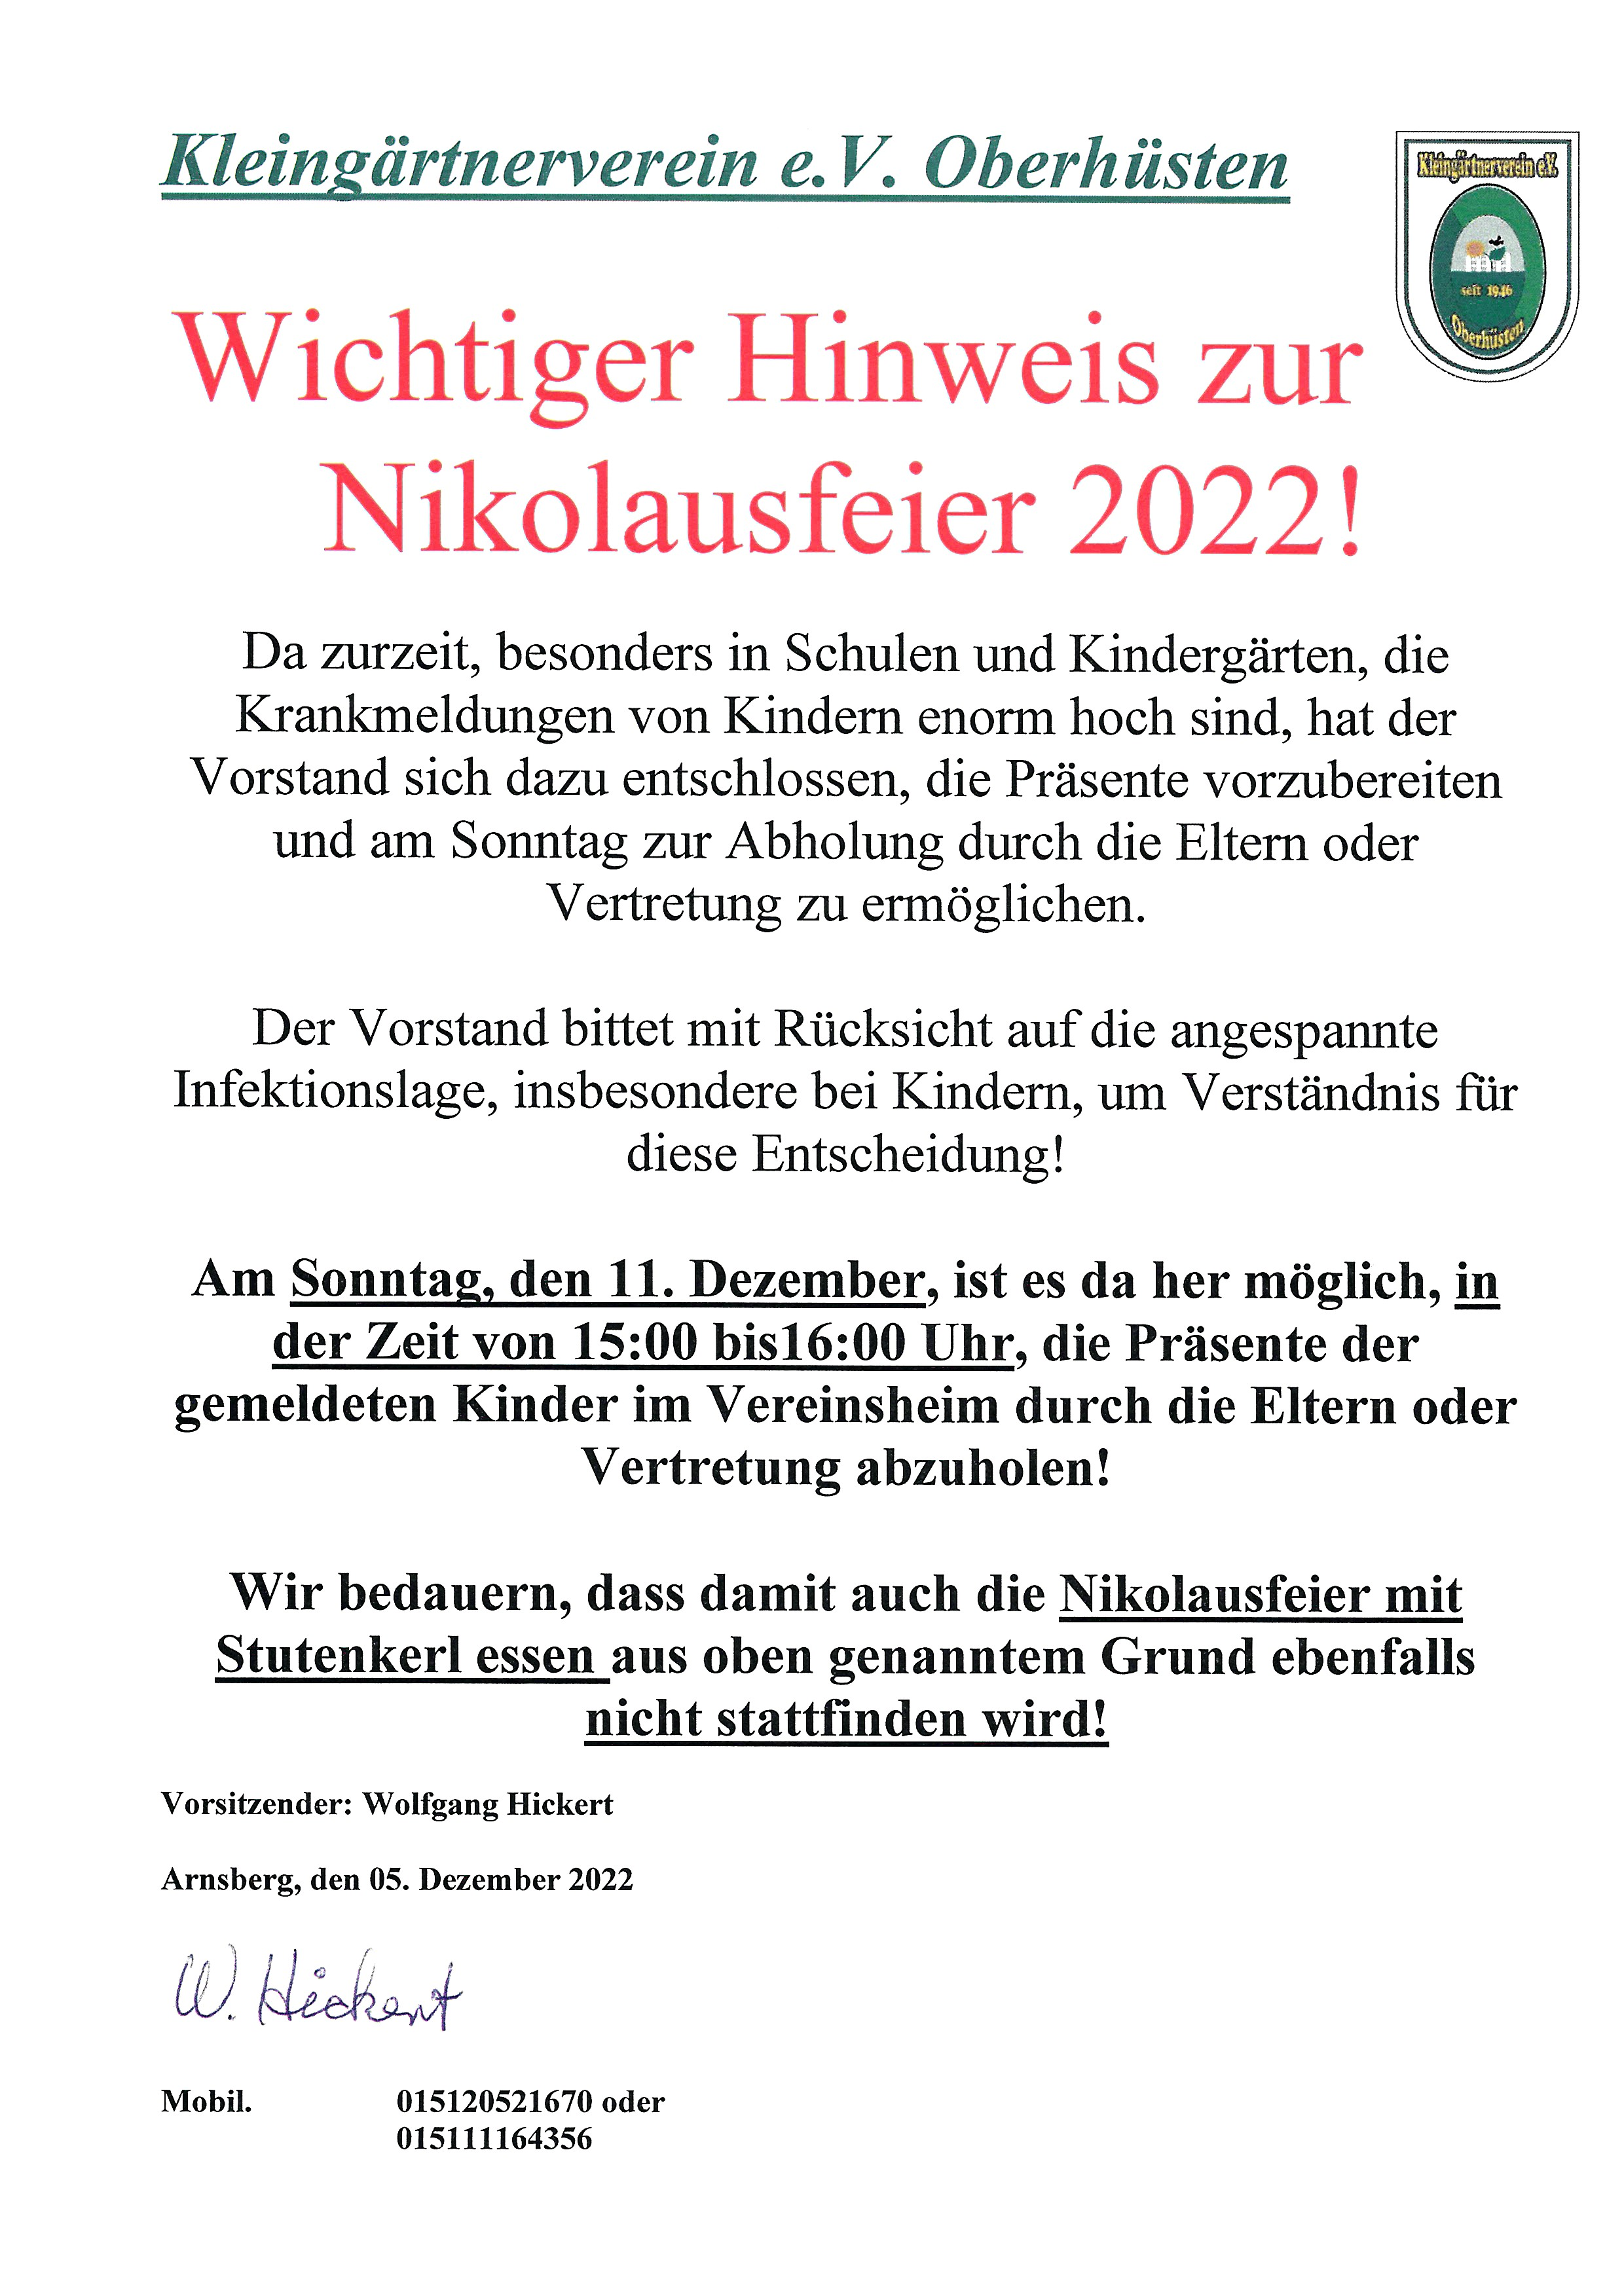 absage-nikolausfeier-2022.png